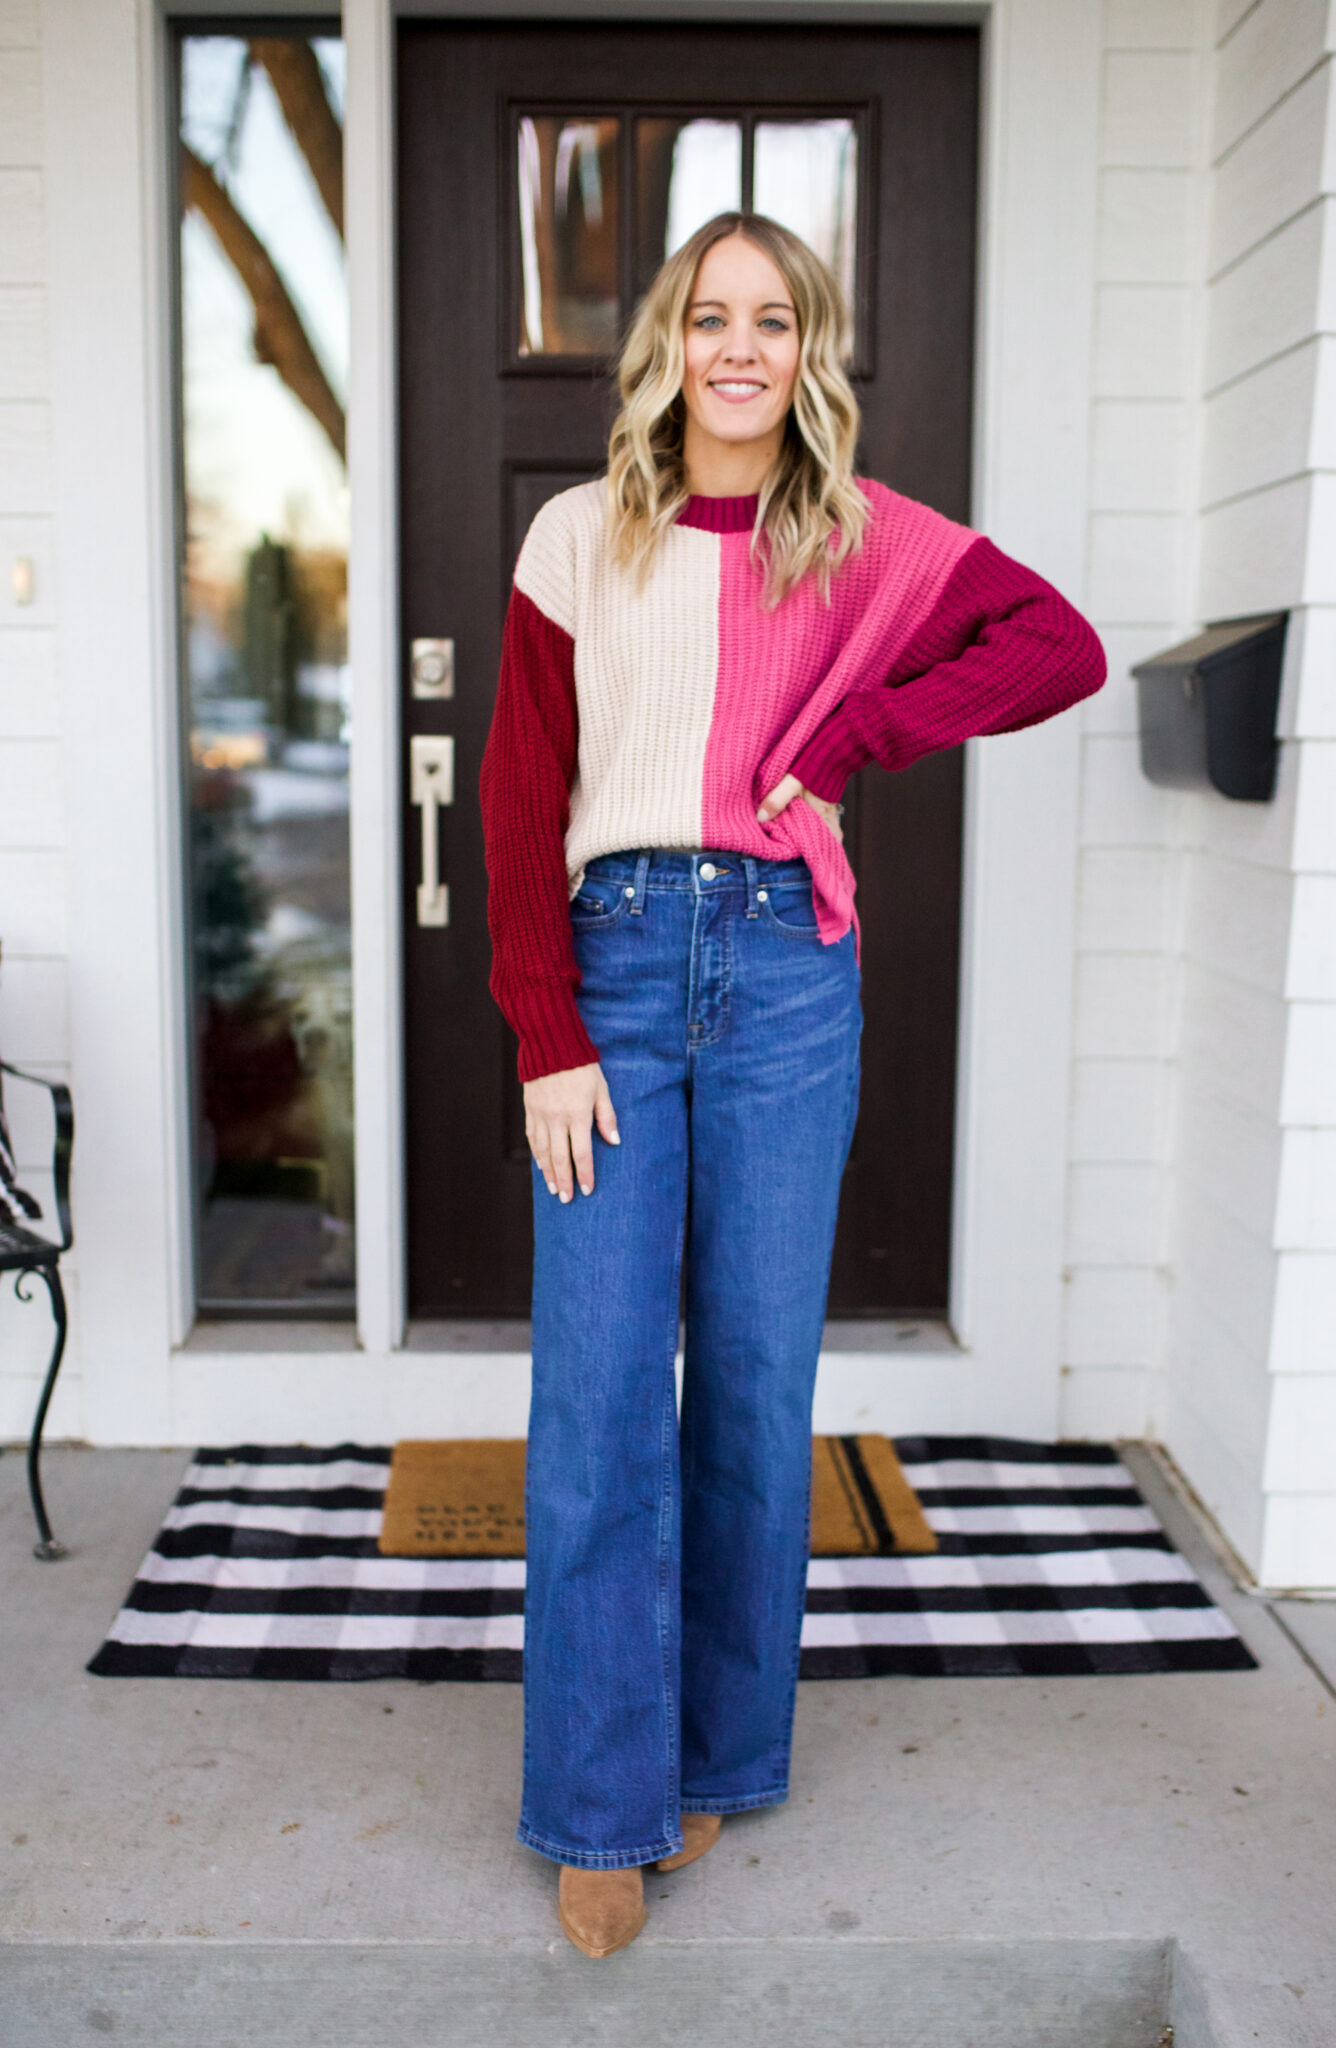 flare jeans, pink colorblock sweater and boots